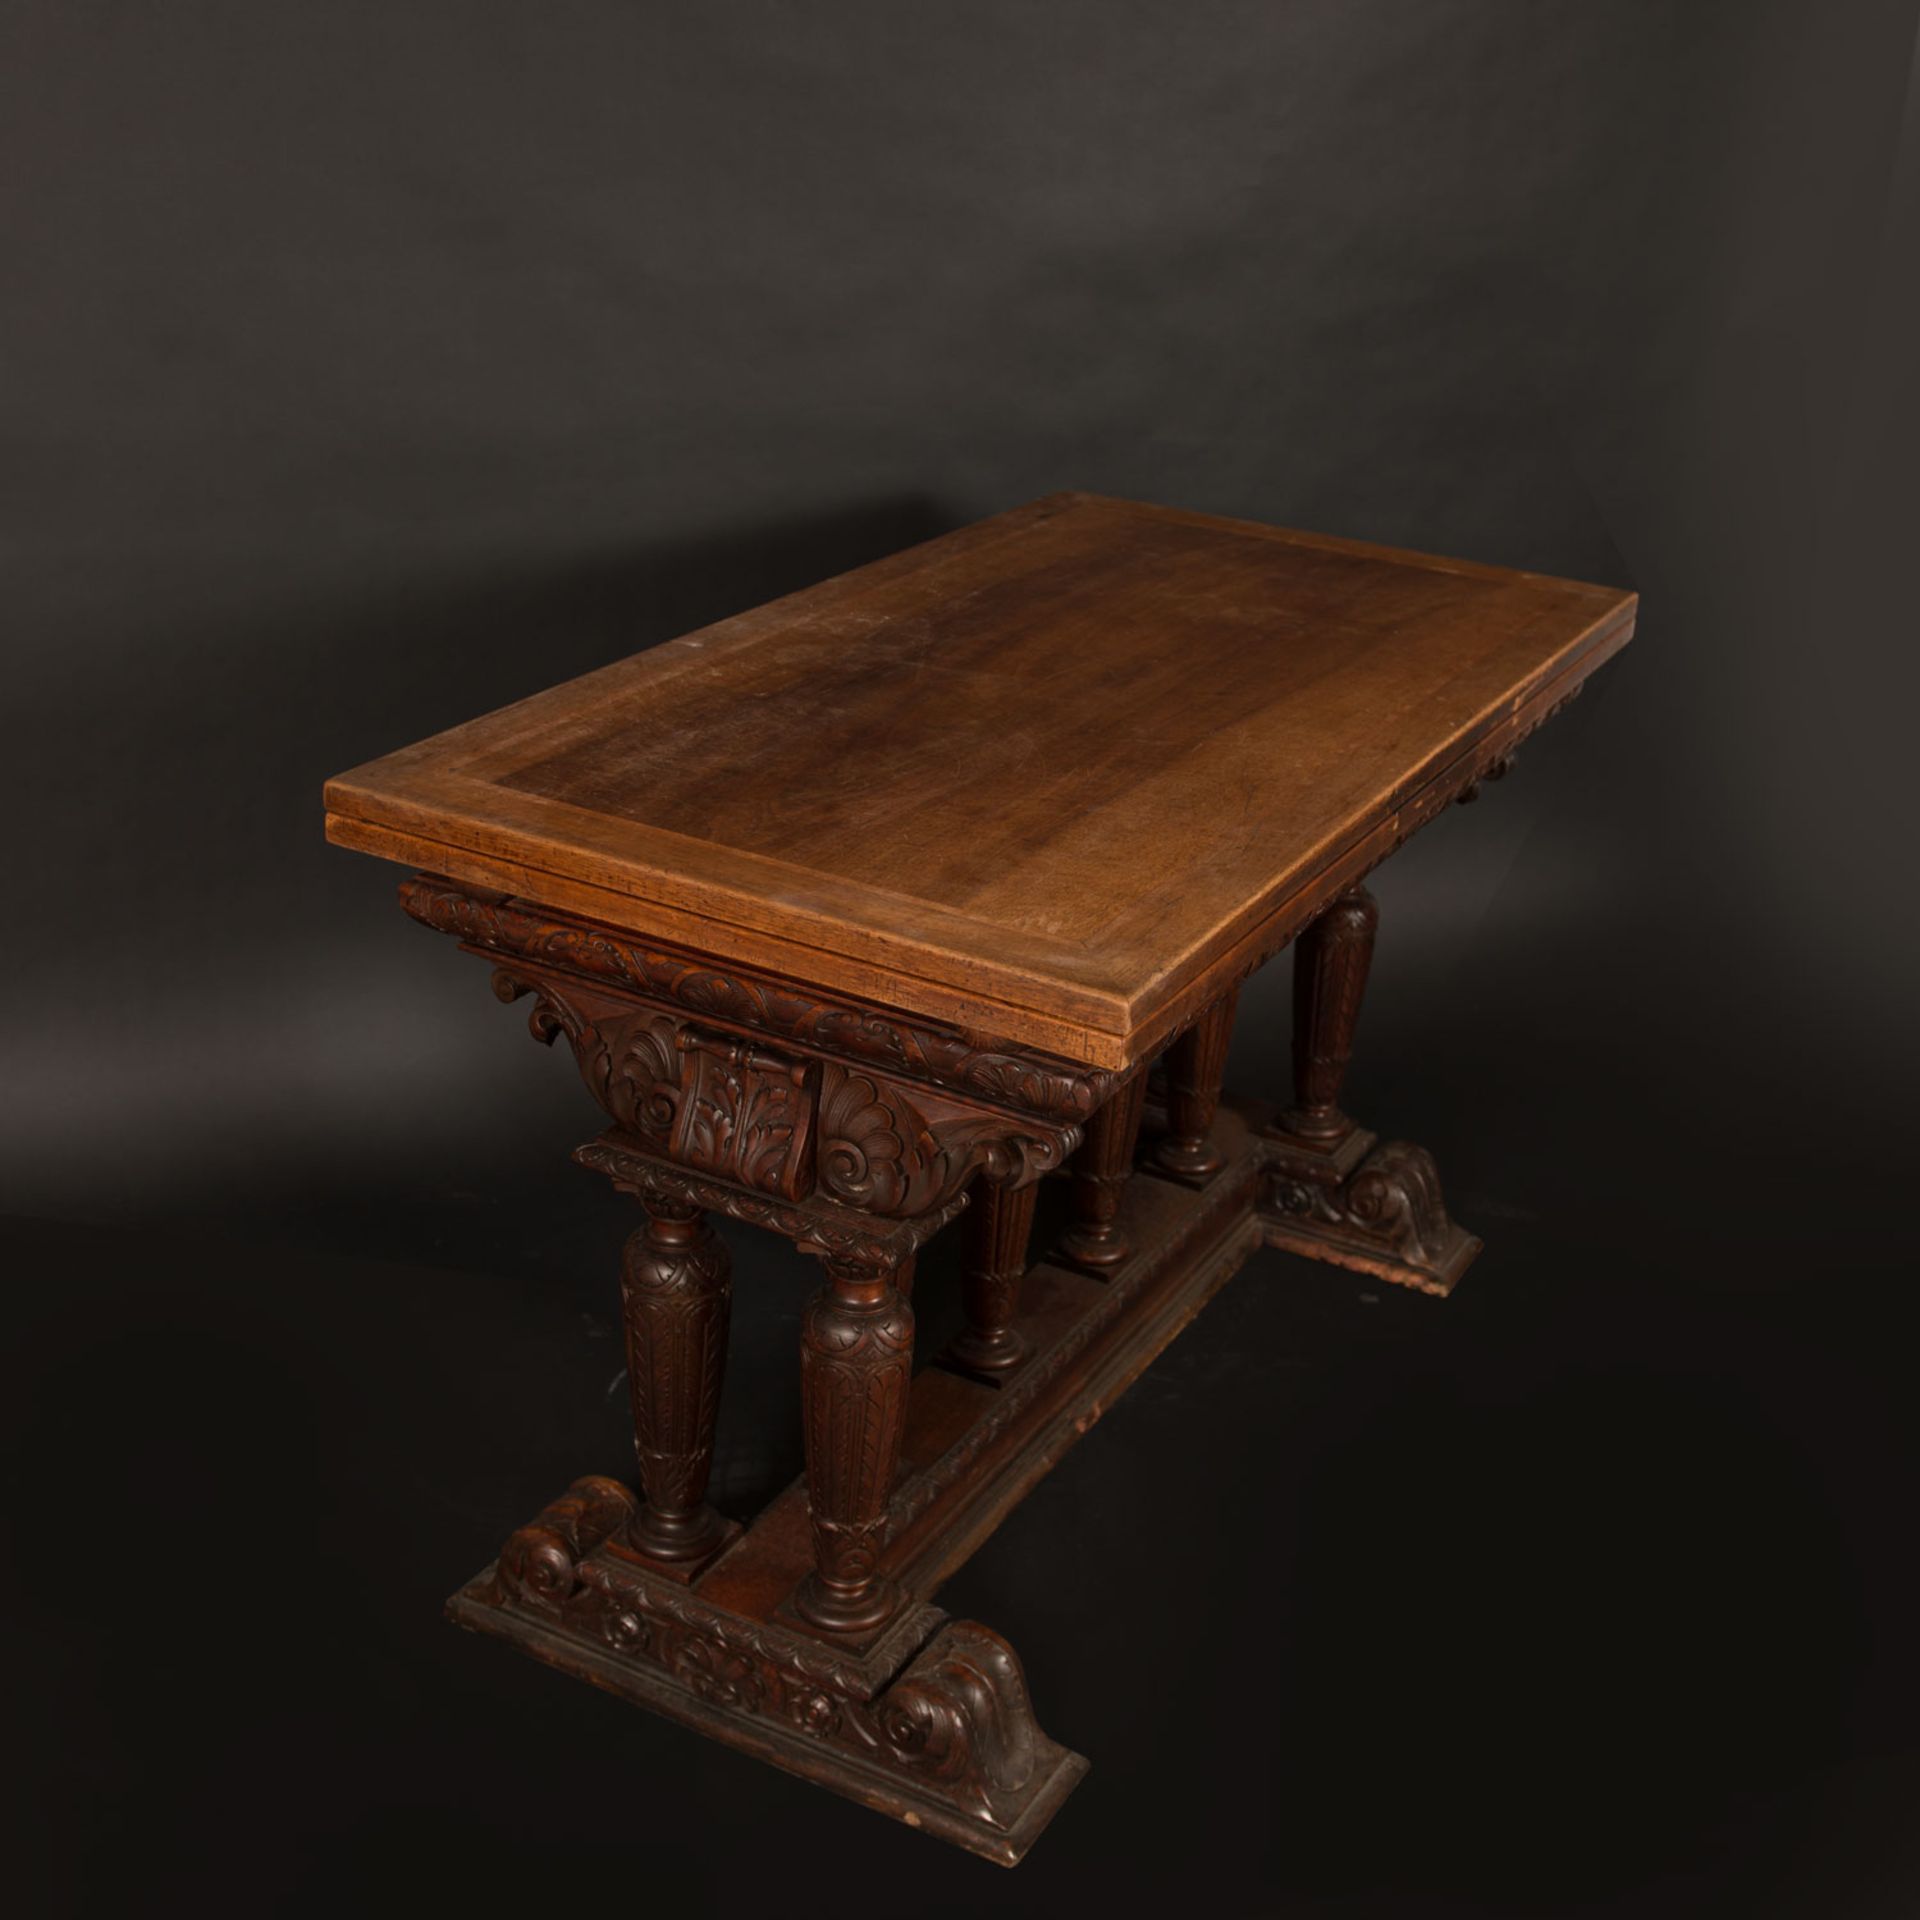 Expanable hall table in Renaissance manner - Image 2 of 3